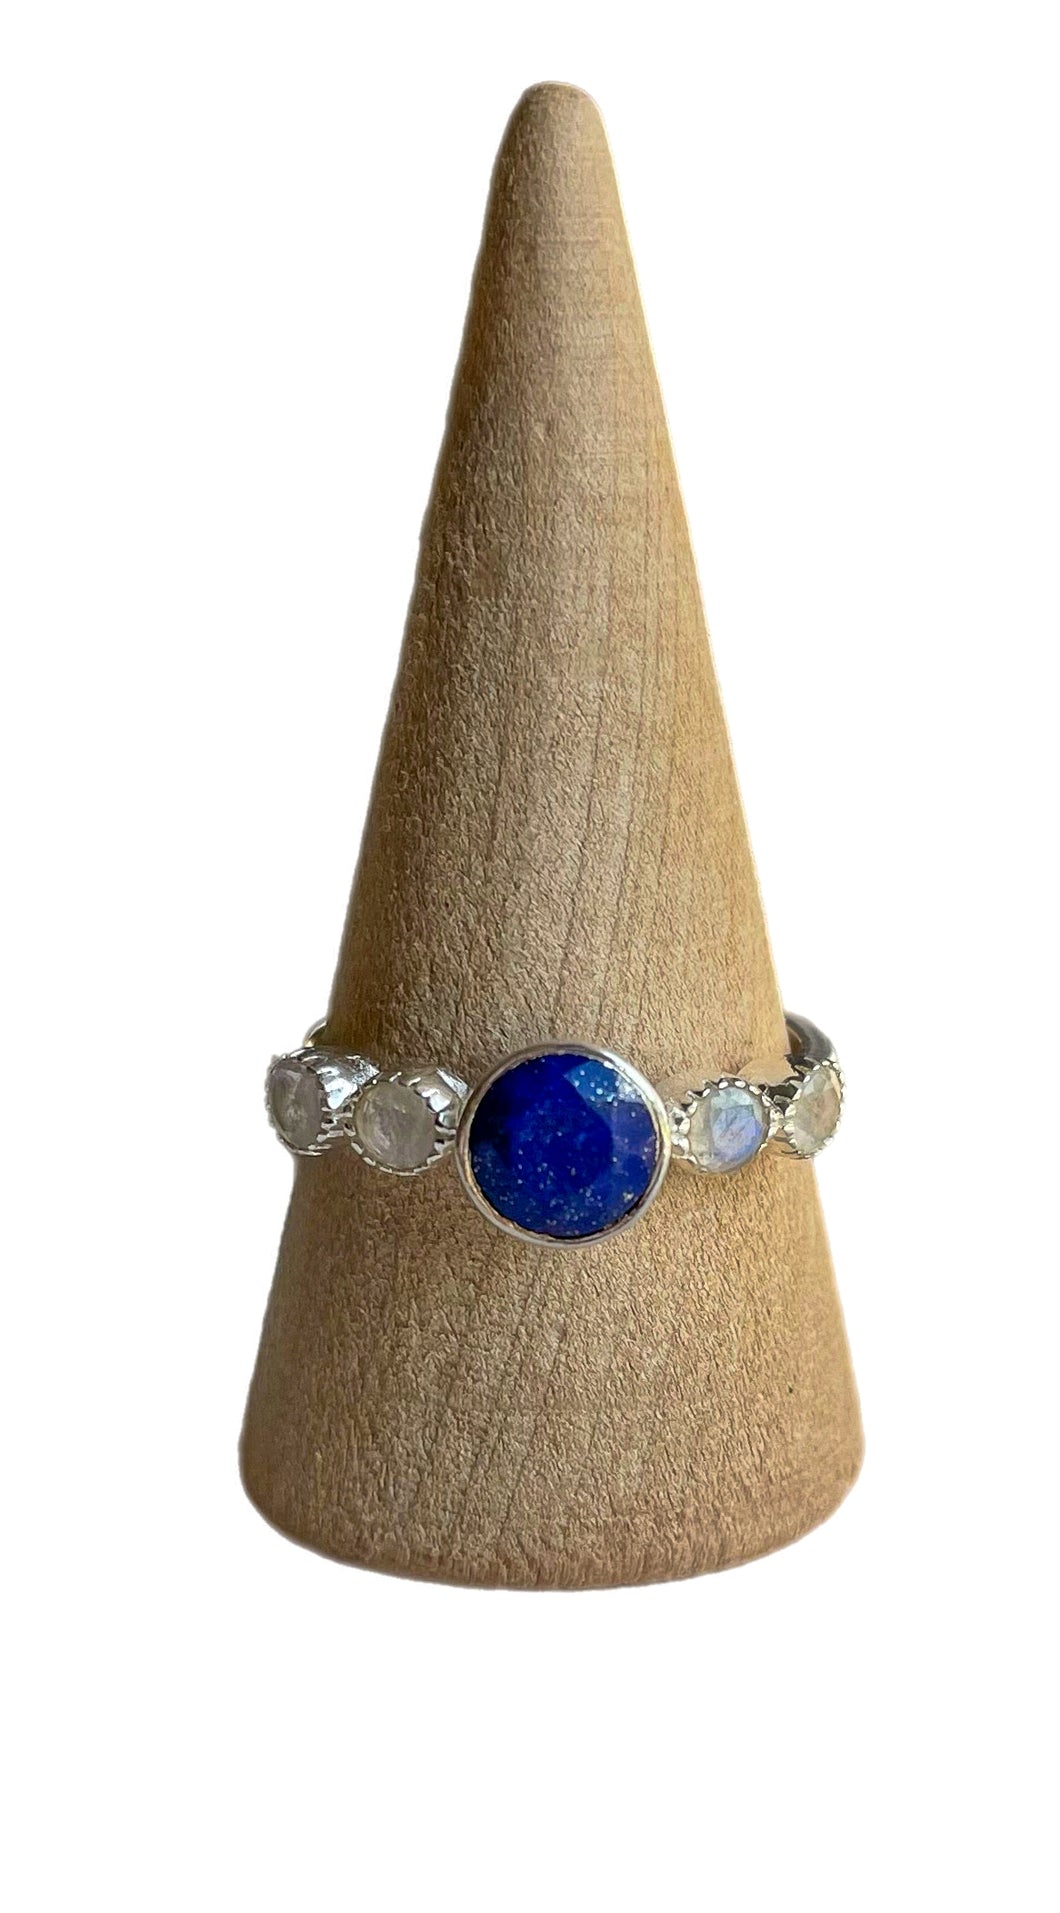 Lapis Lazuli and Moonstone Sterling Silver Ring